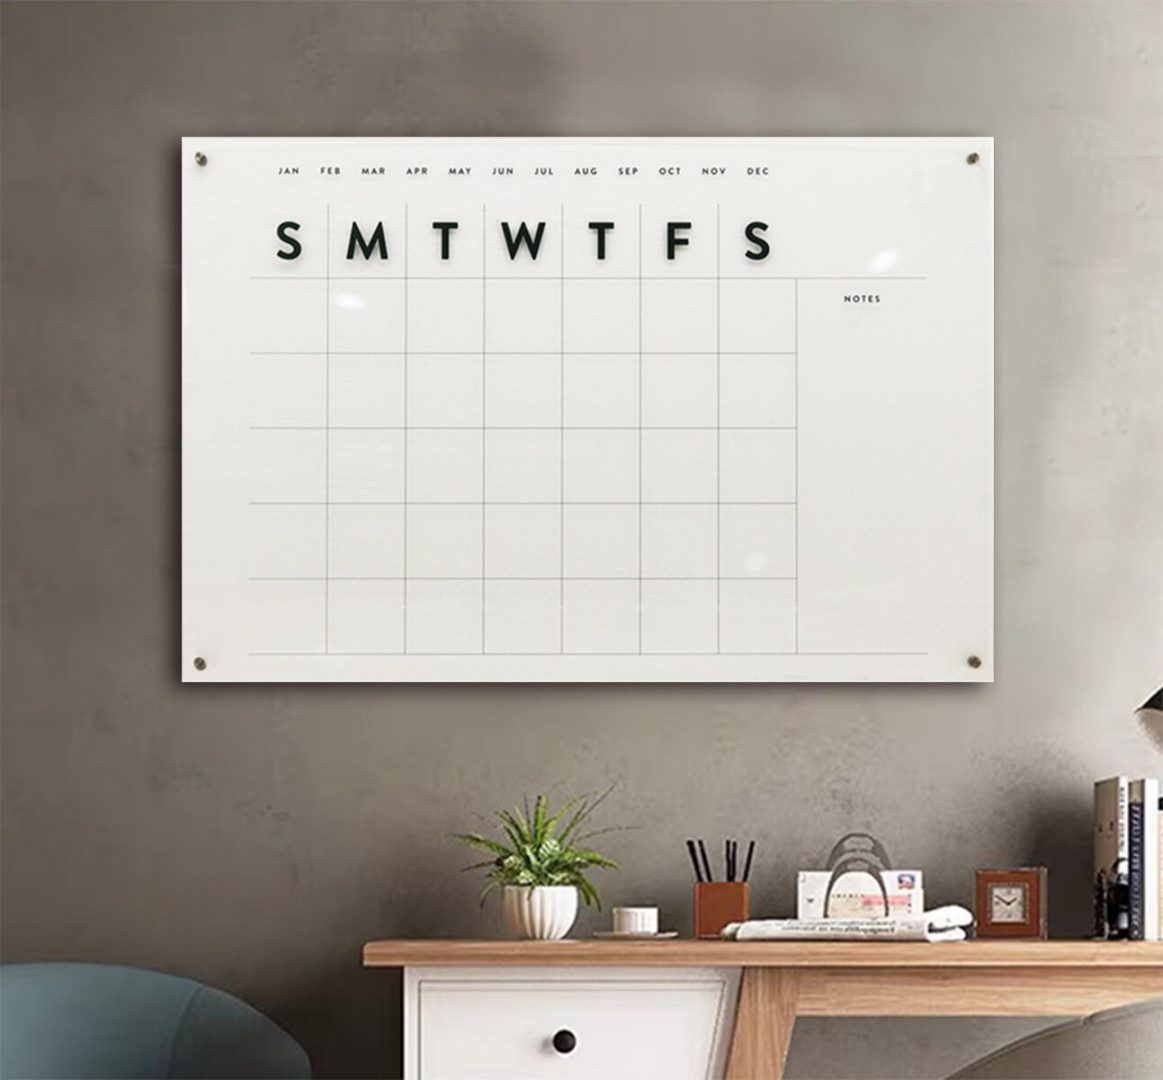 Inch Long Calendars & Planners at Lowes